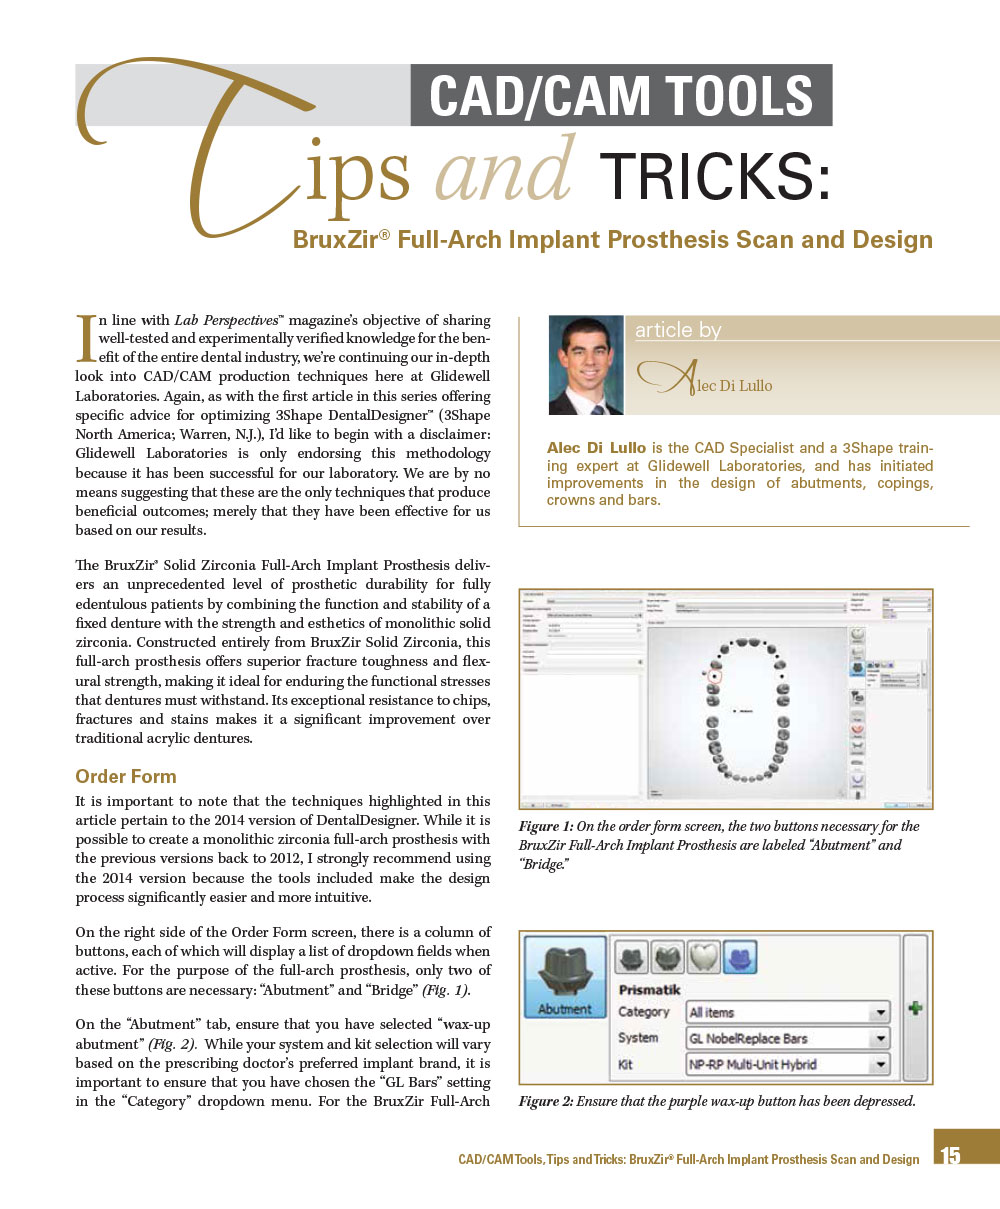 CAD/CAM TOOLS - Tips and TRICKS: BruxZir® Full-Arch Implant Prosthesis Scan and Design